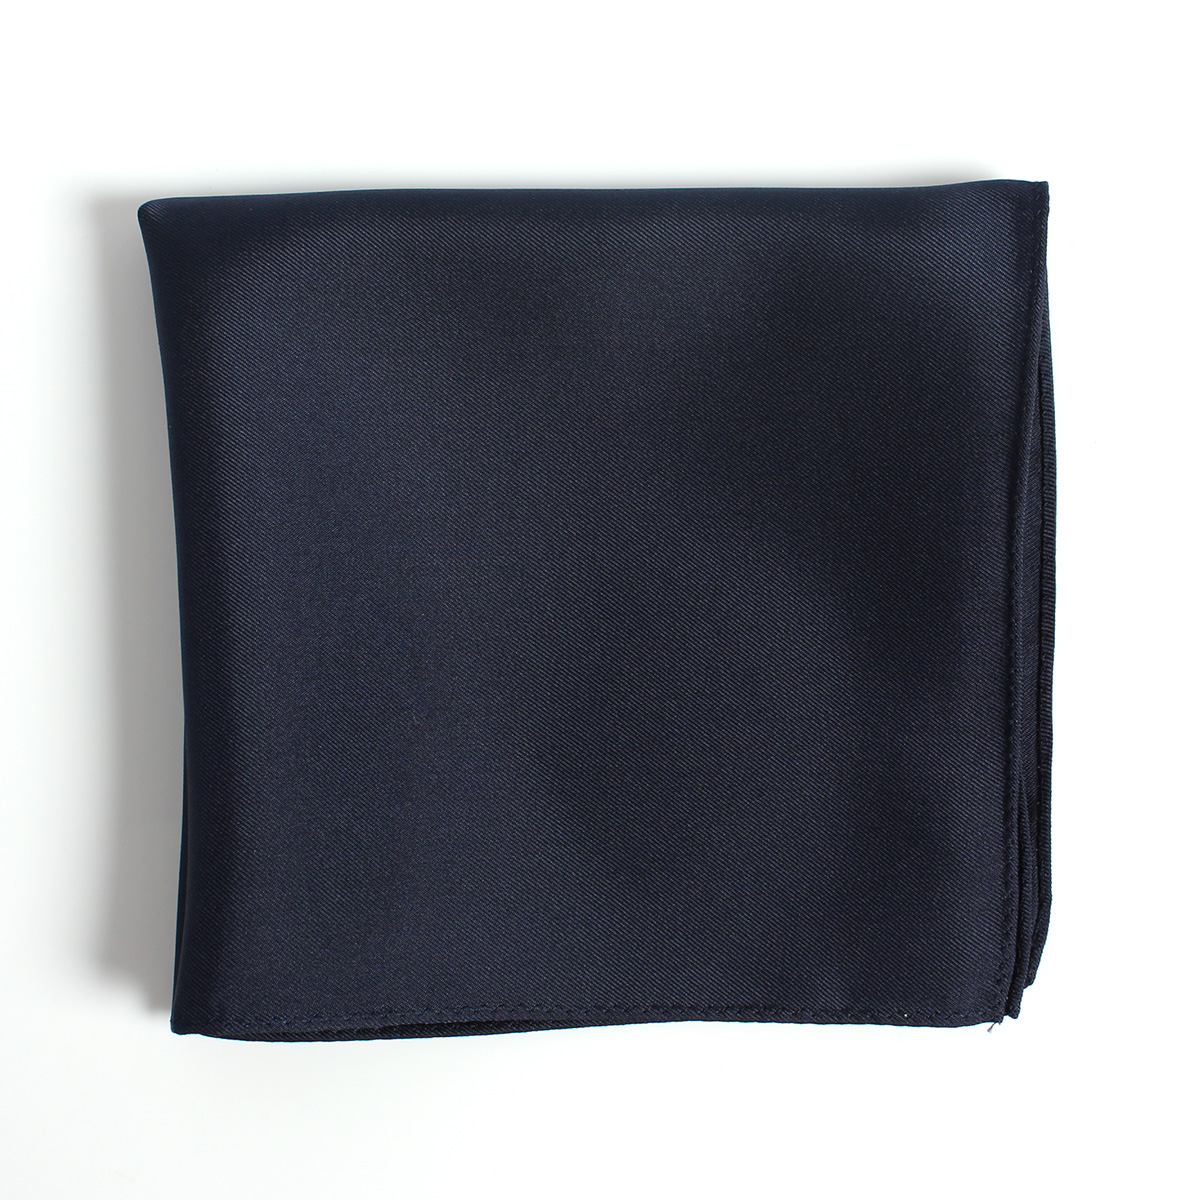 CF-1180 Made In Japan Twill 16 Momme Silk Pocket Square Navy Blue[Formal Accessories] Yamamoto(EXCY)